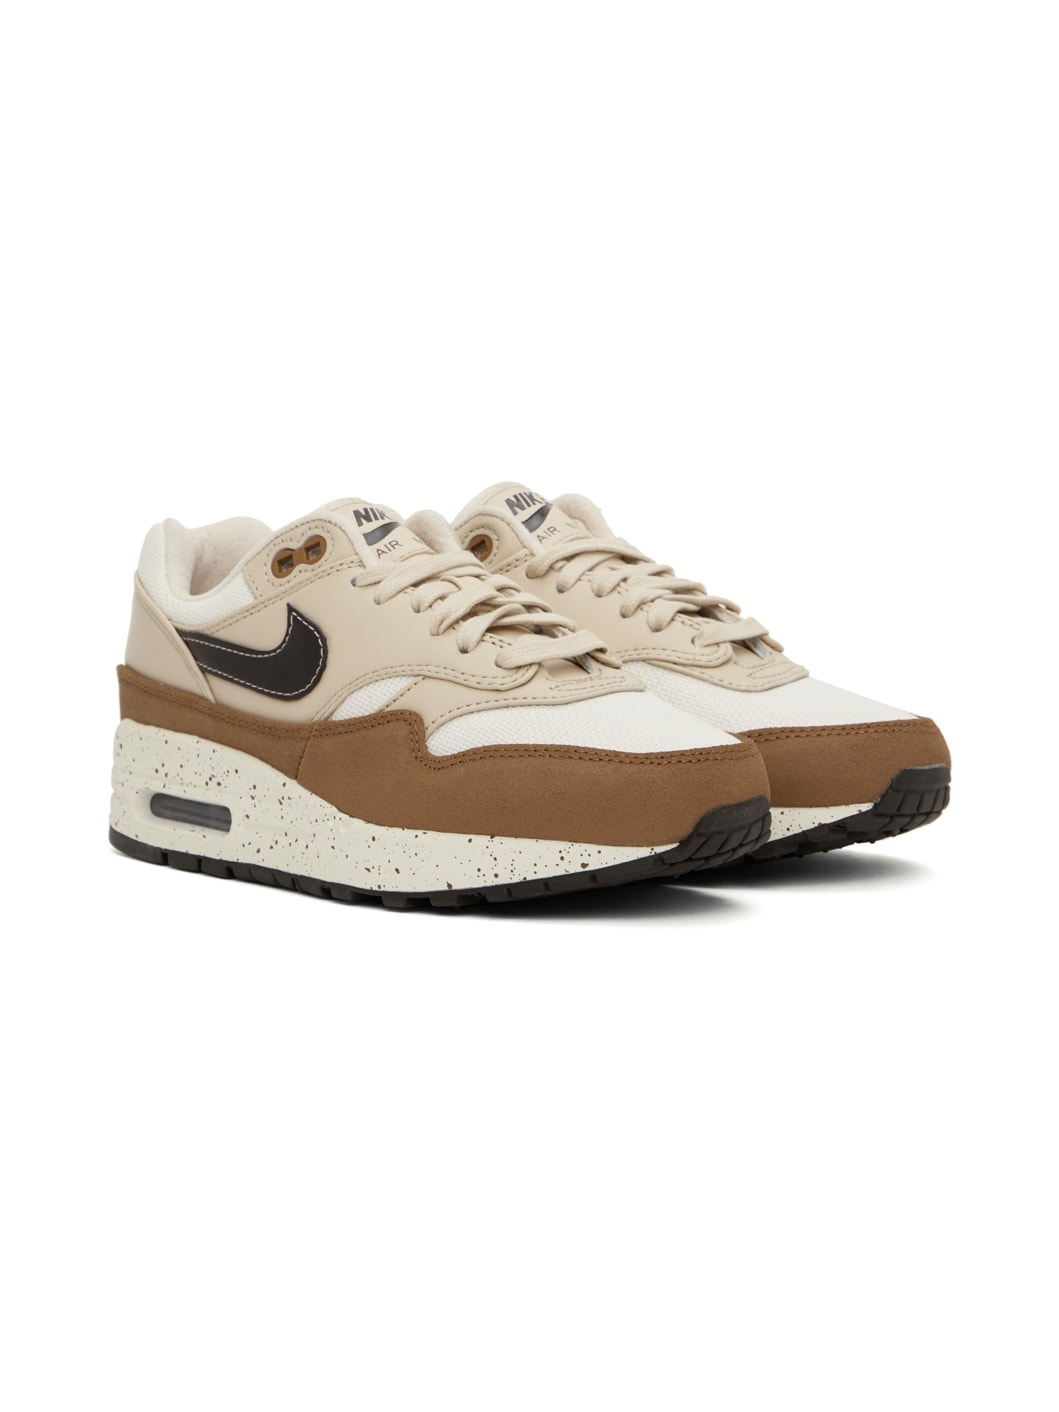 White & Brown Air Max 1 '87 Sneakers - 4